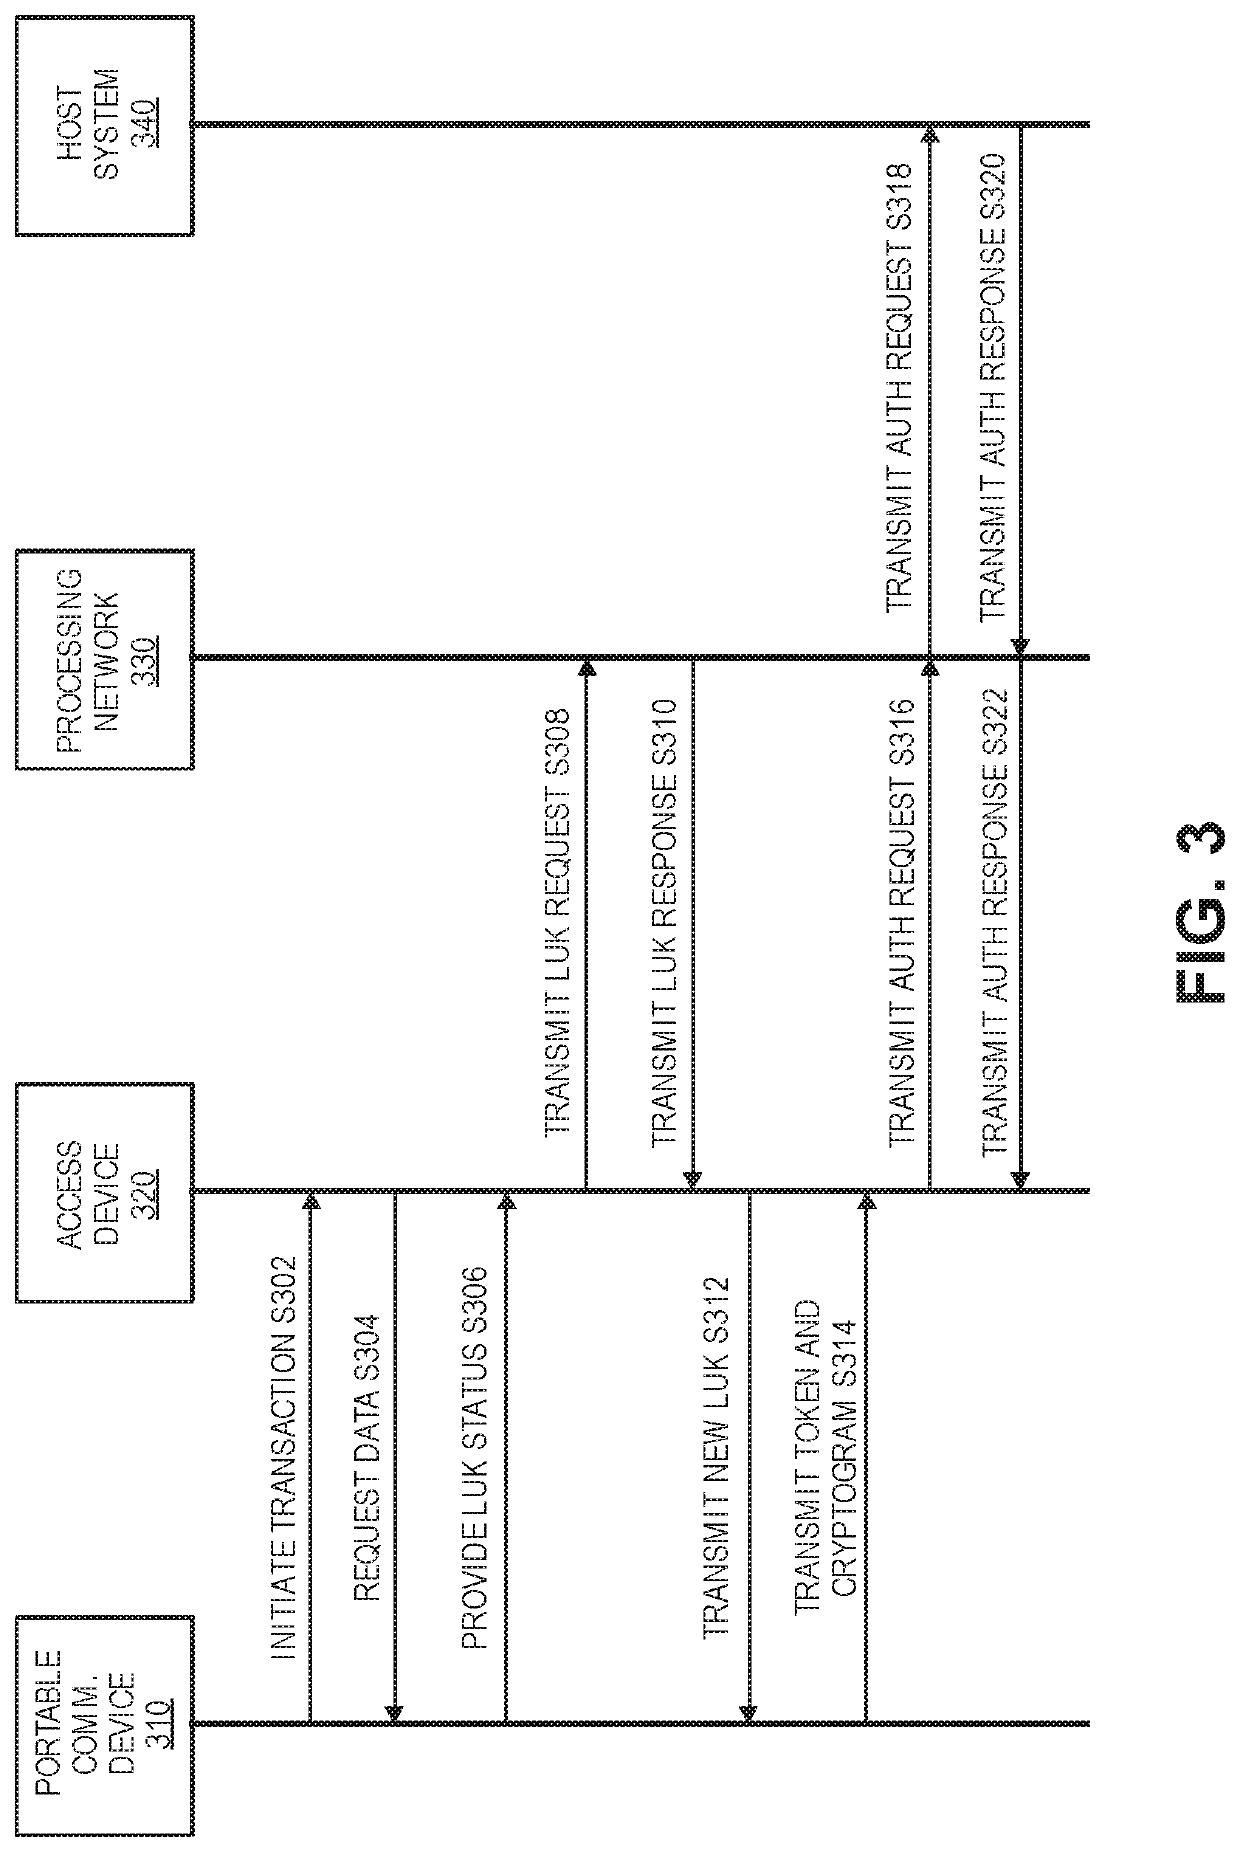 Encryption key exchange process using access device